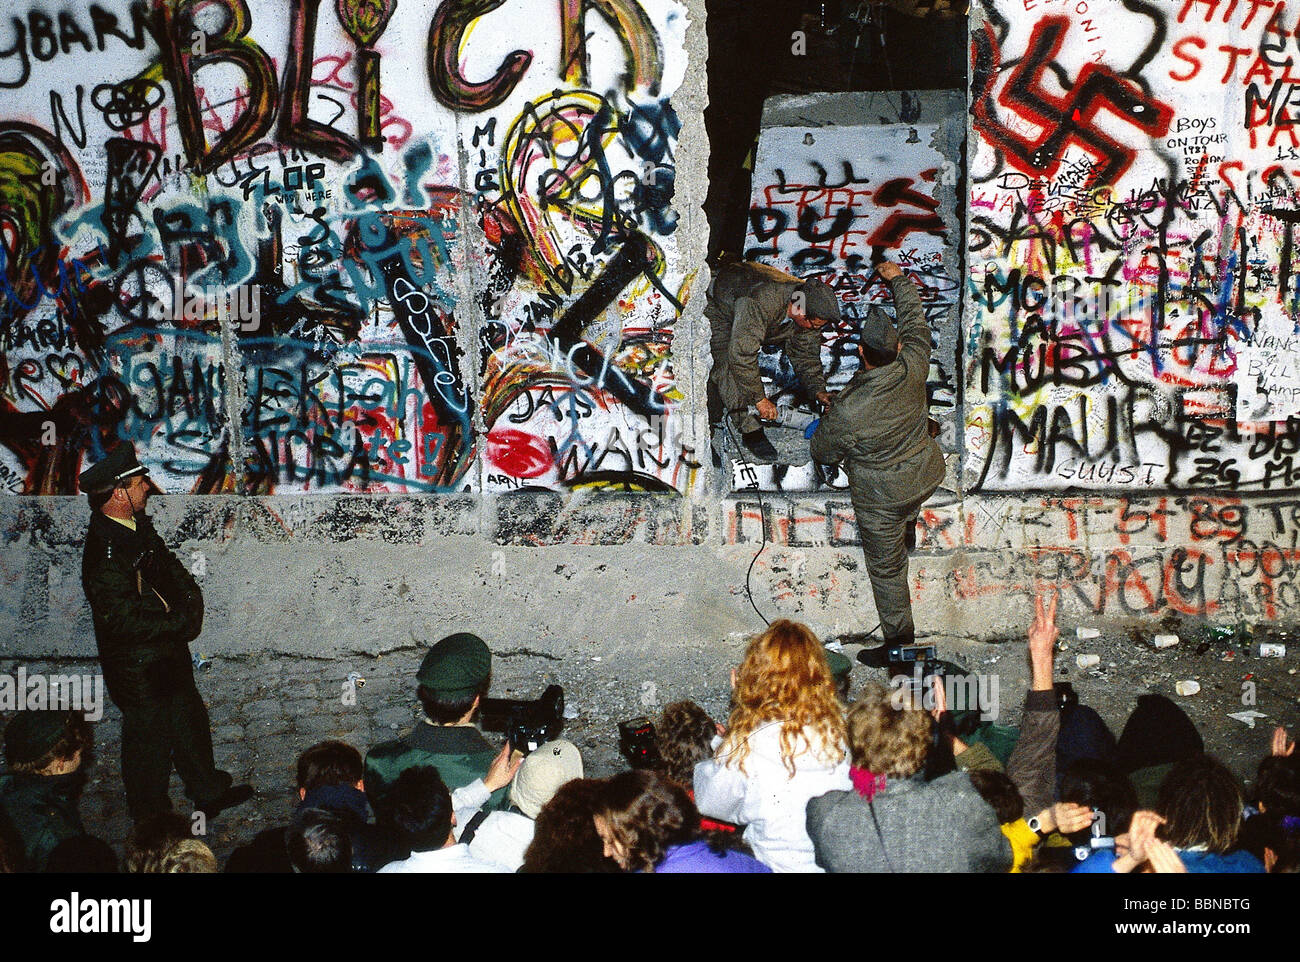 geography / travel, Germany, Fall of the Berlin Wall, opening, Berlin, 9.11.1989, historic, historical, 20th century, 1980s, 80s, down, November'89, November 89, East Germany, East-Germany, German border, destroying, destruction, people, Stock Photo